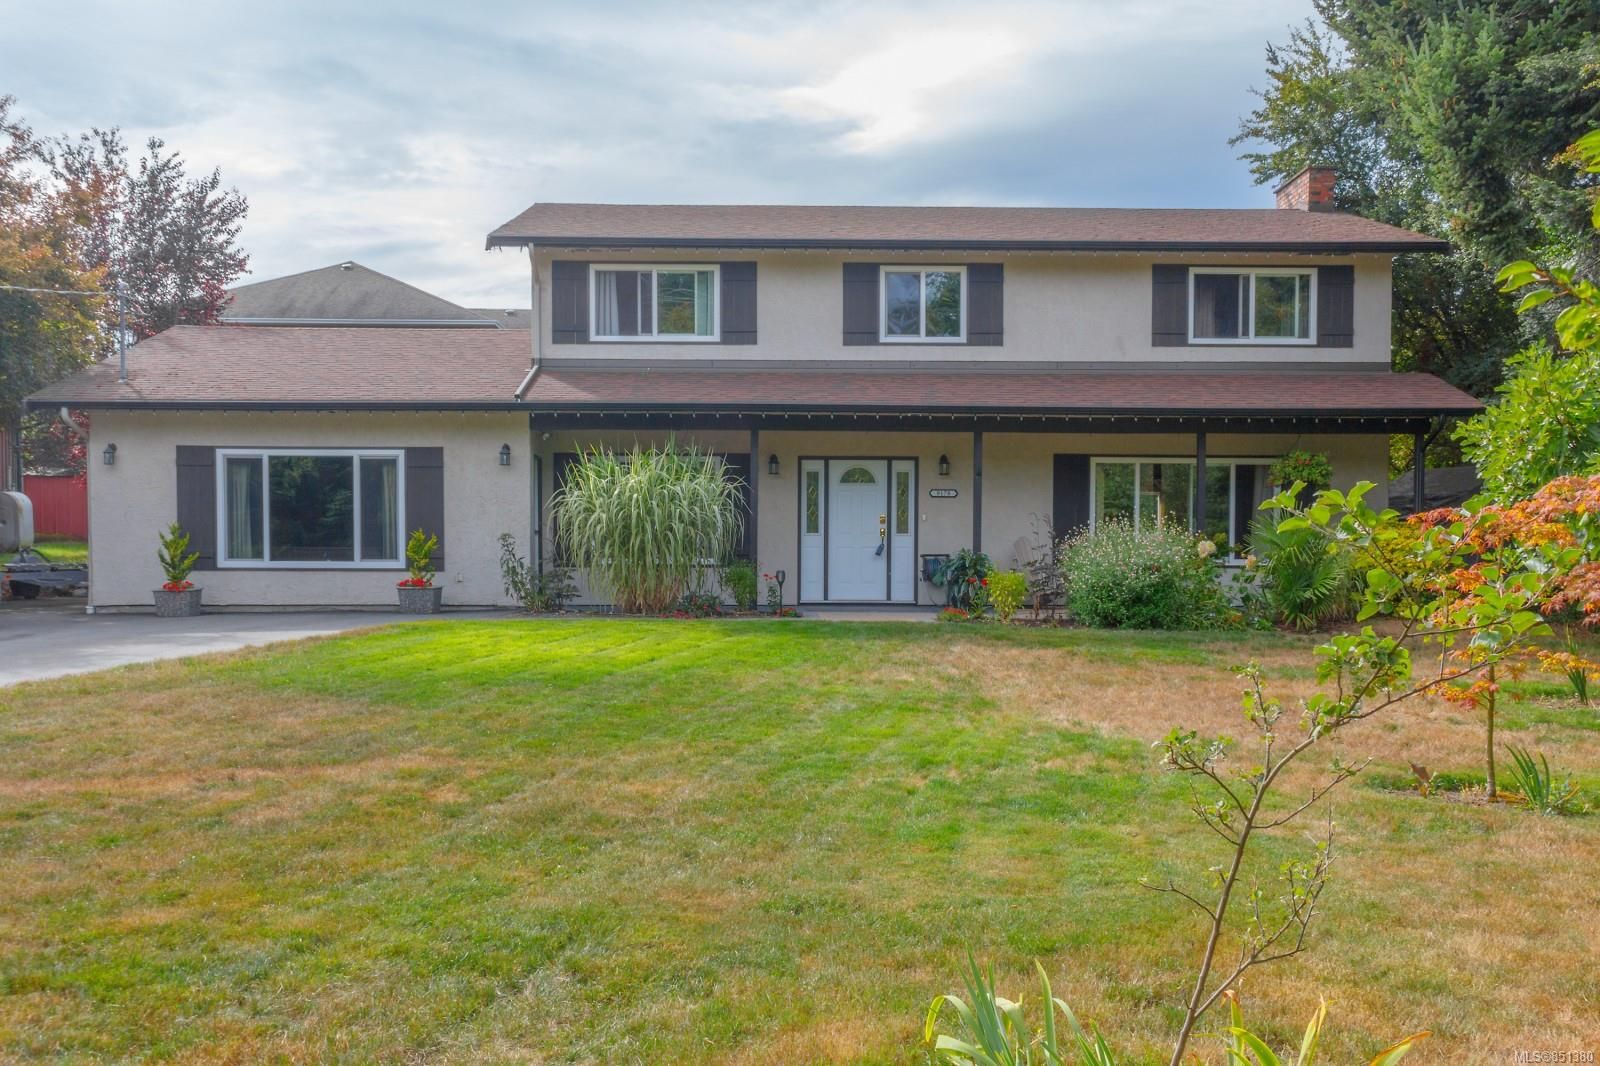 Nicely maintained 4 bedroom home nestled on a quiet cul-de-sac